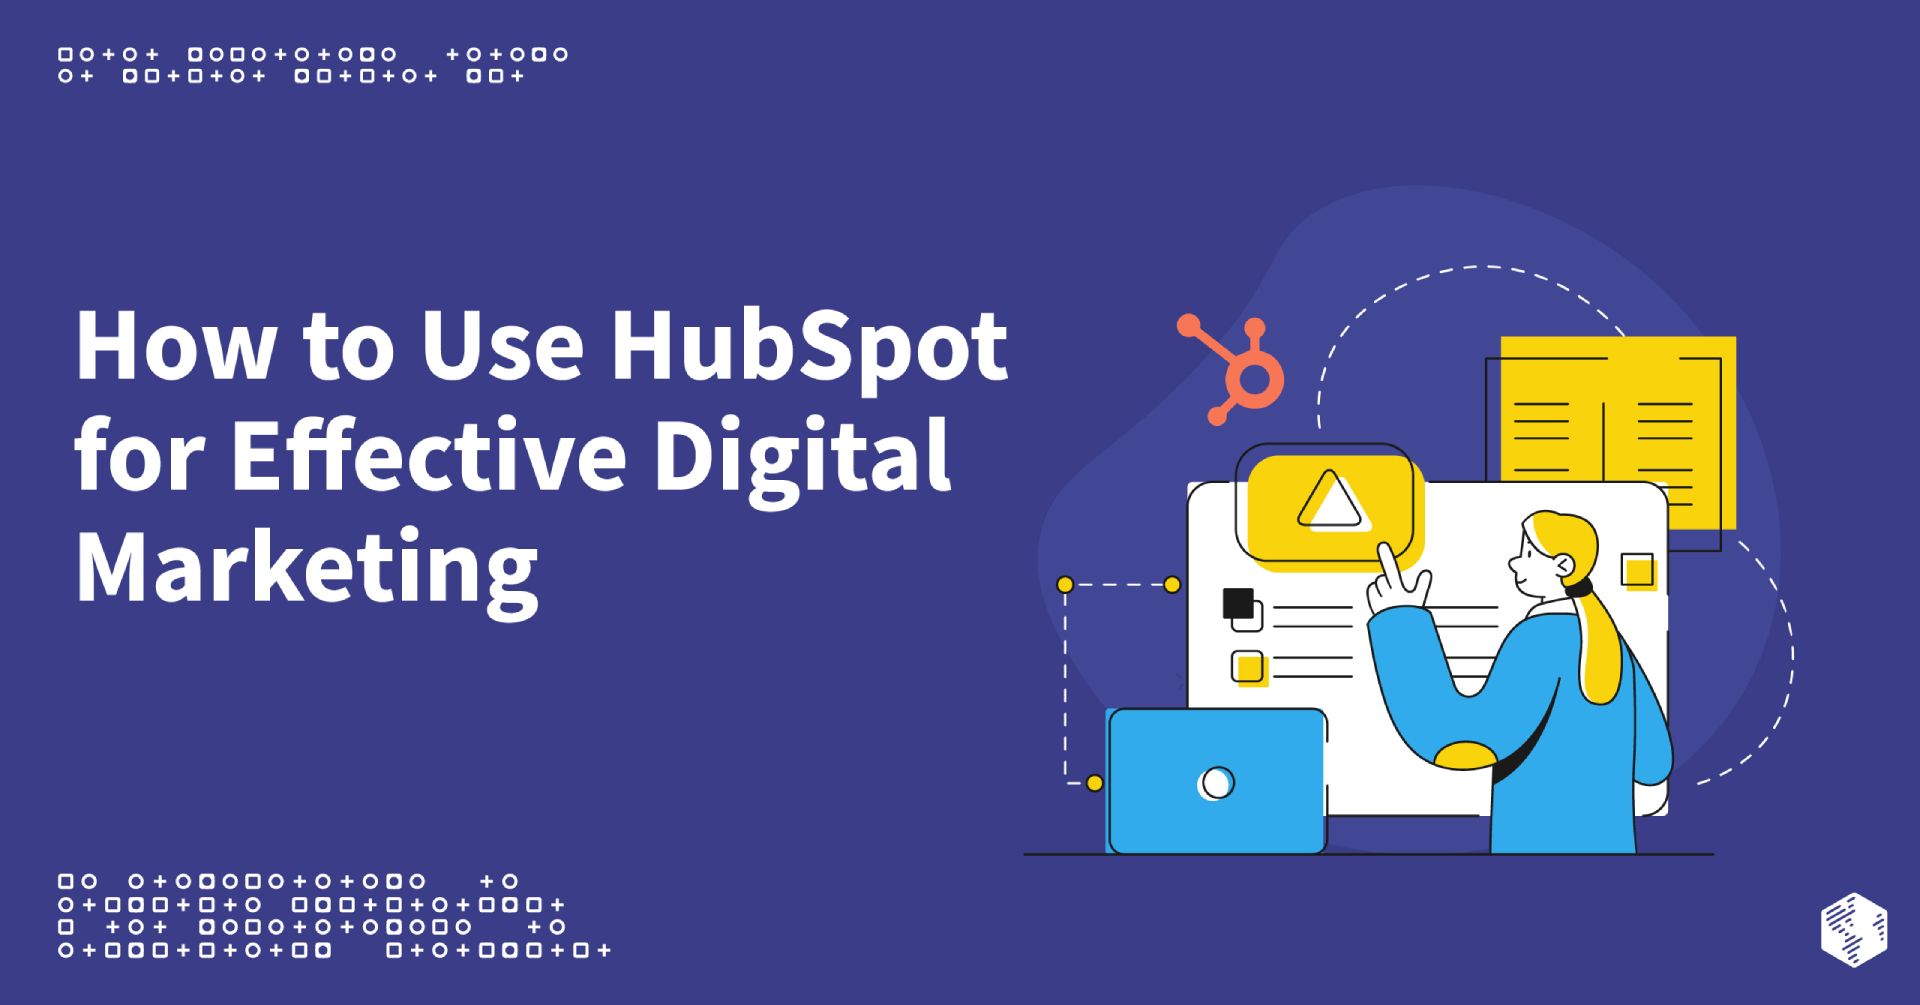 How to Use HubSpot for Effective Digital Marketing and Business Growth